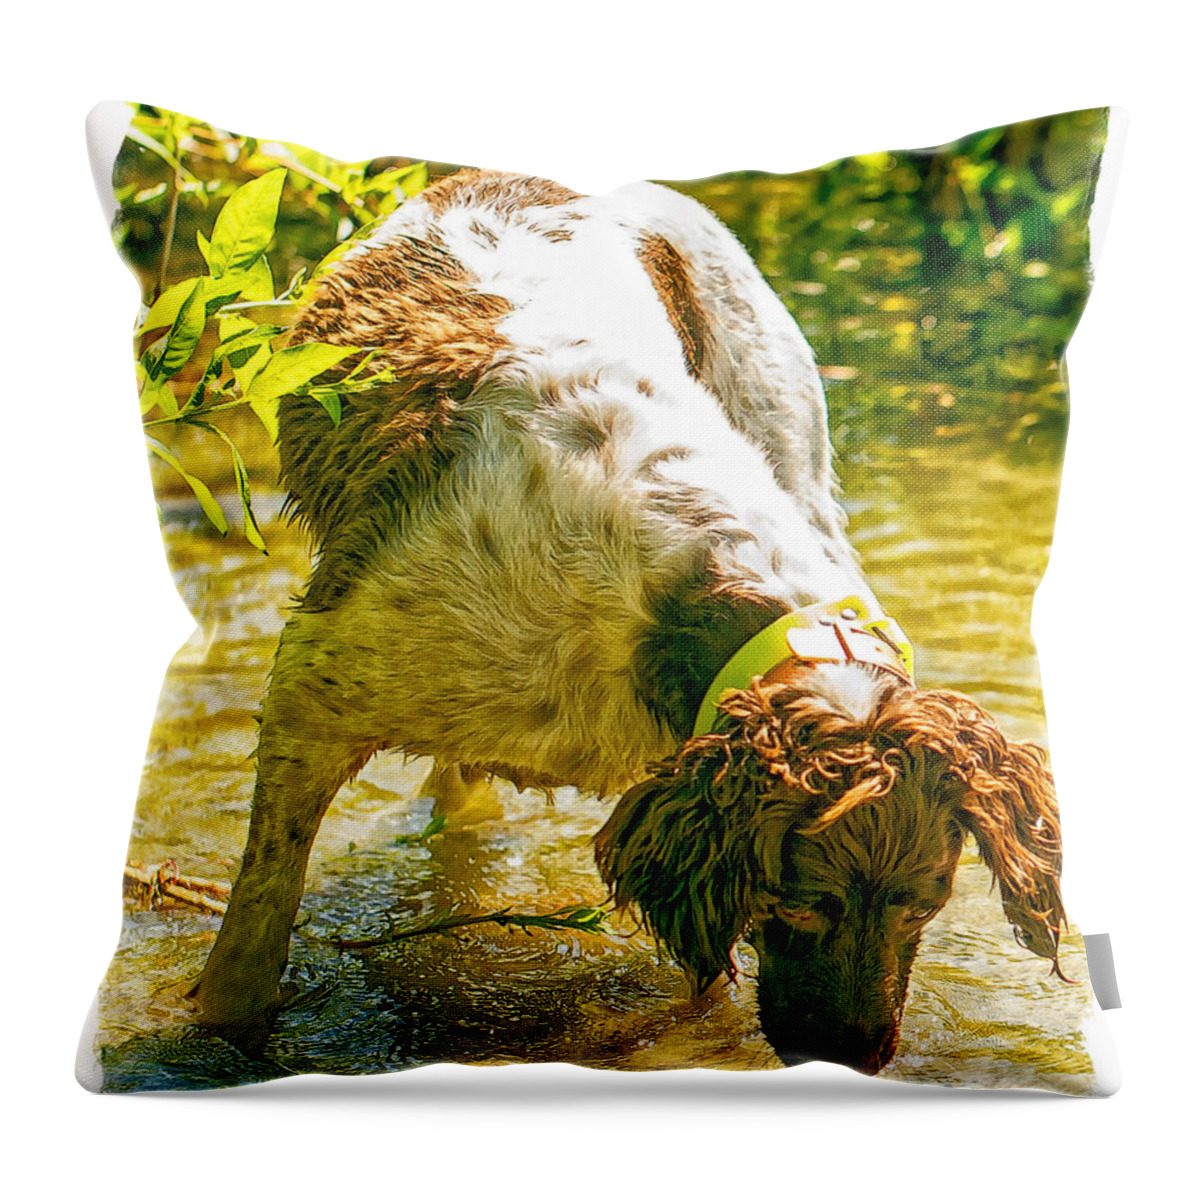 Dogs Throw Pillow featuring the photograph Springer Spaniel Field by Constantine Gregory